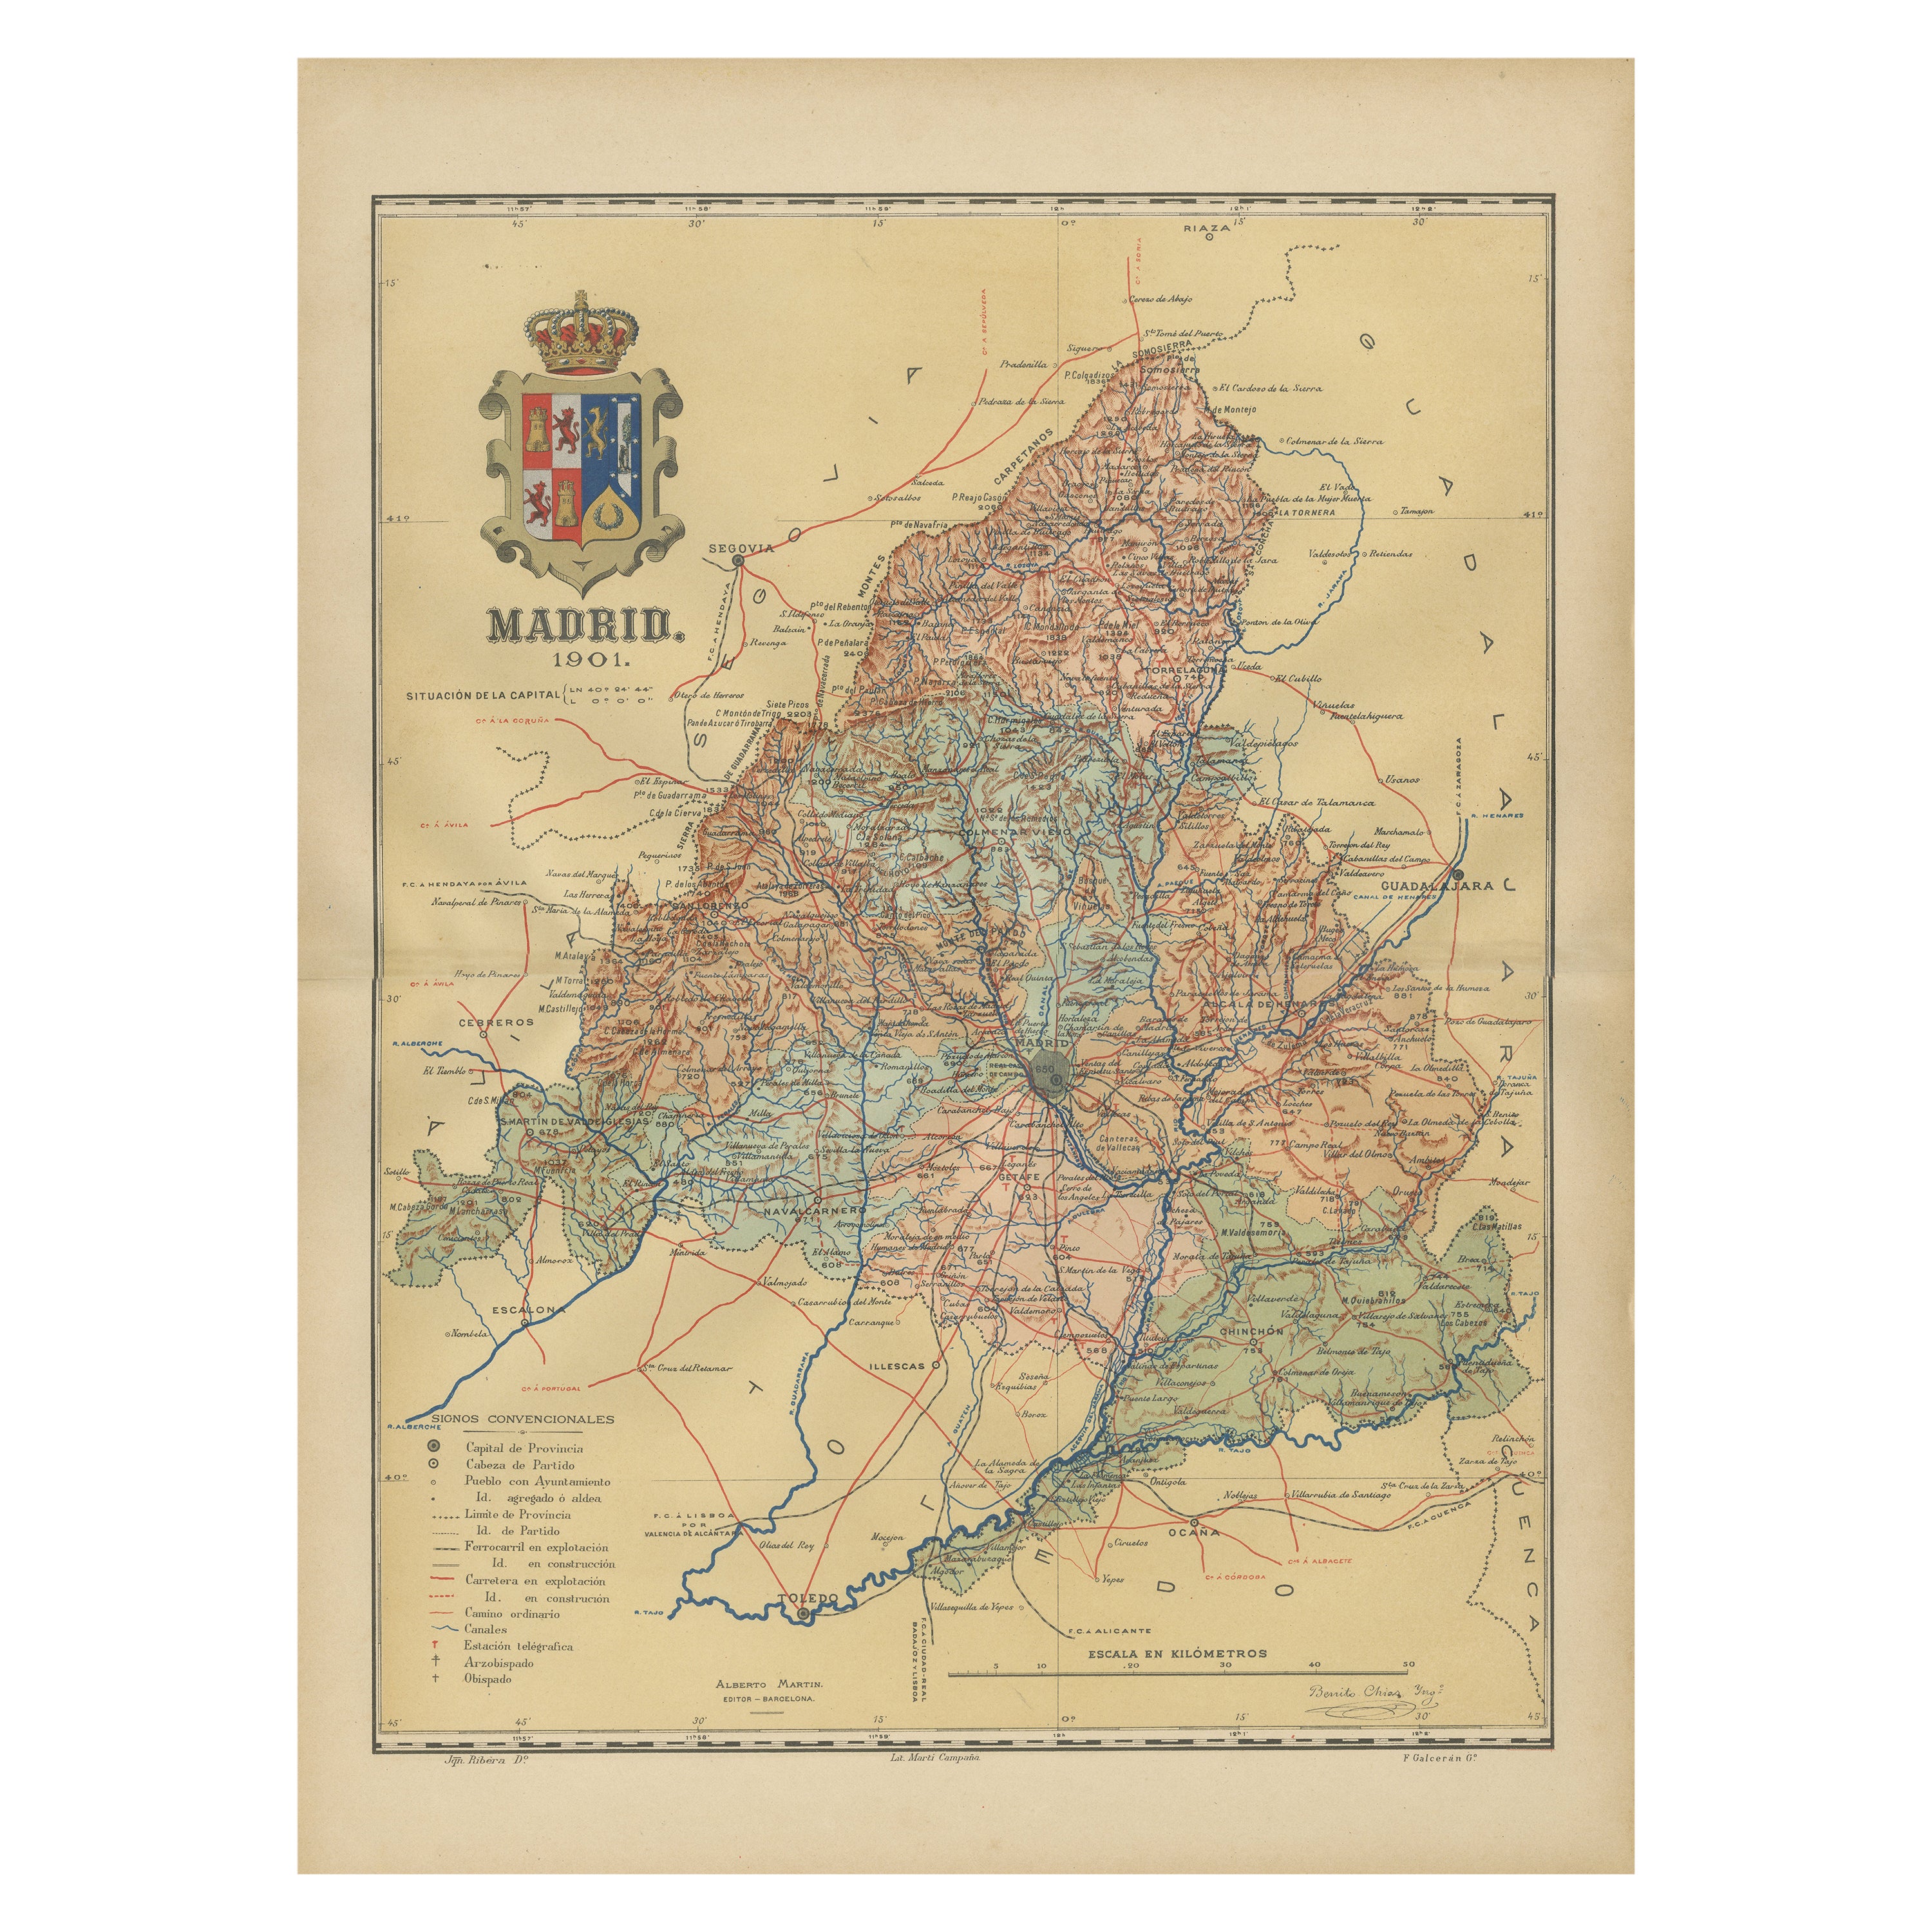 Madrid 1901: A Historical Map of Spain's Capital Province For Sale